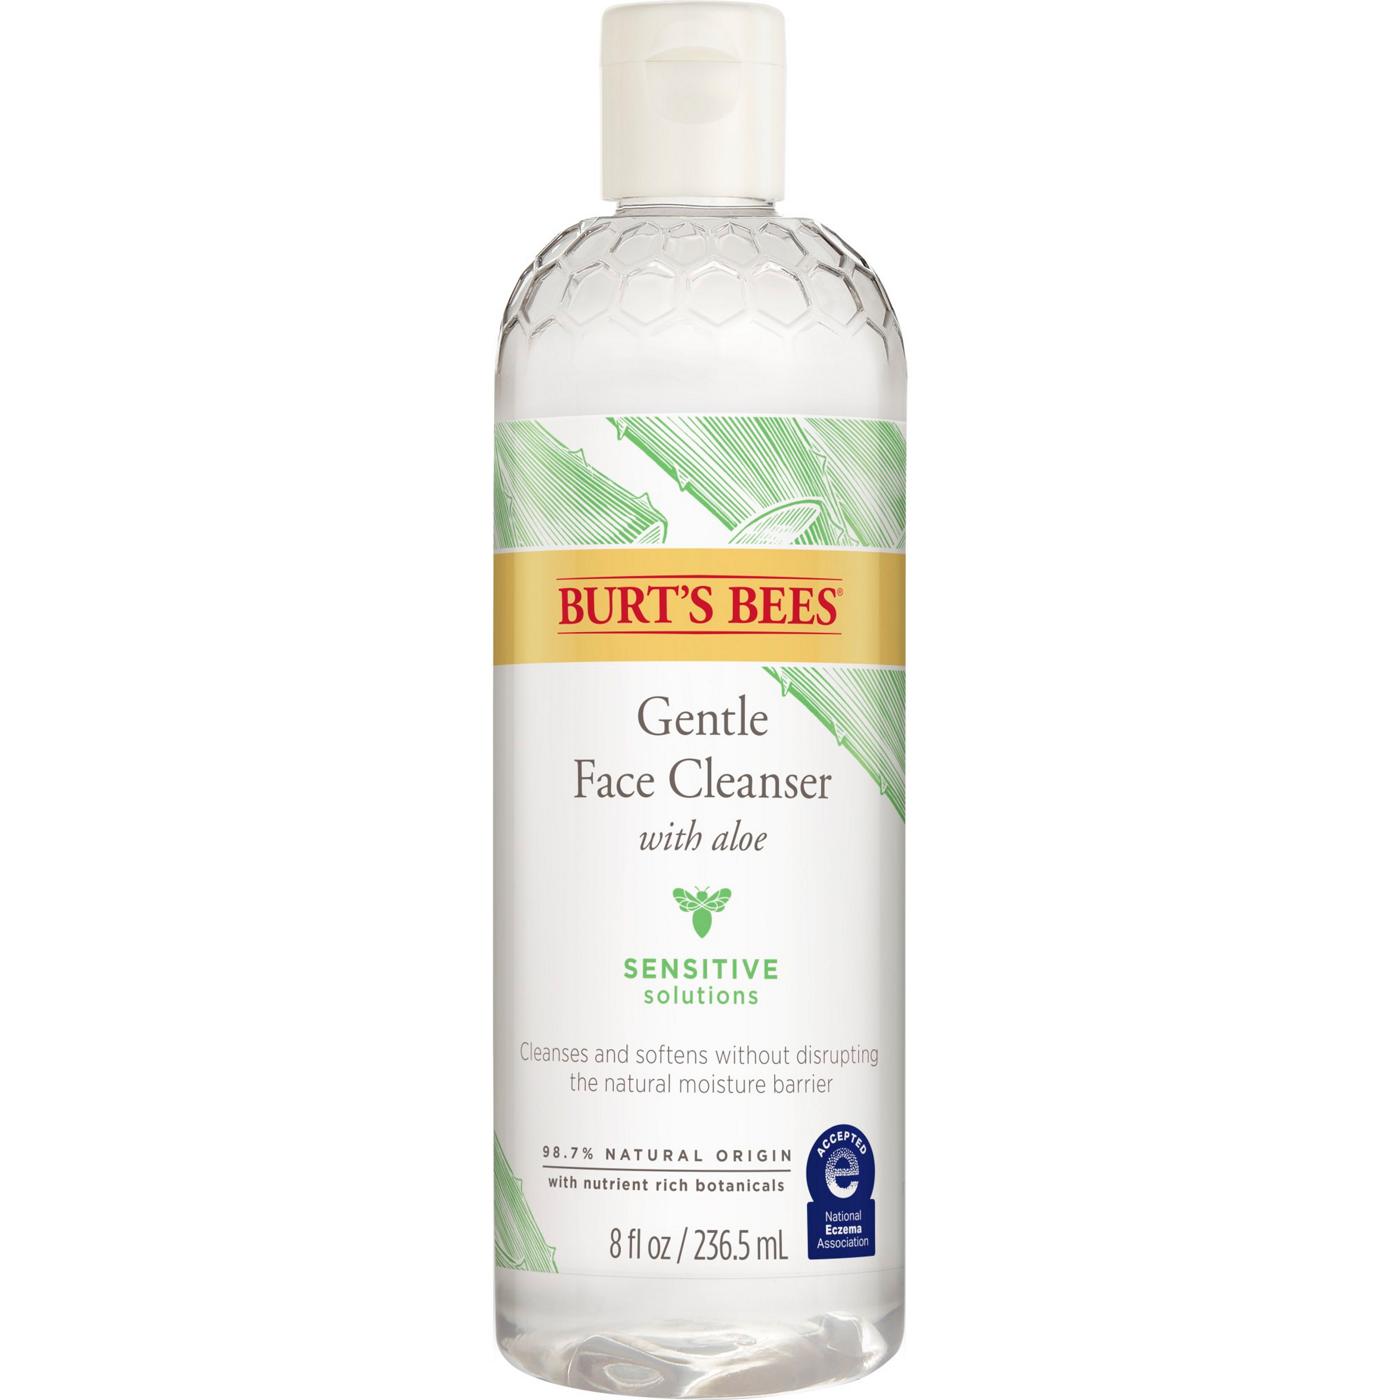 Burt's Bees Gentle Facial Cleanser with Aloe; image 1 of 8